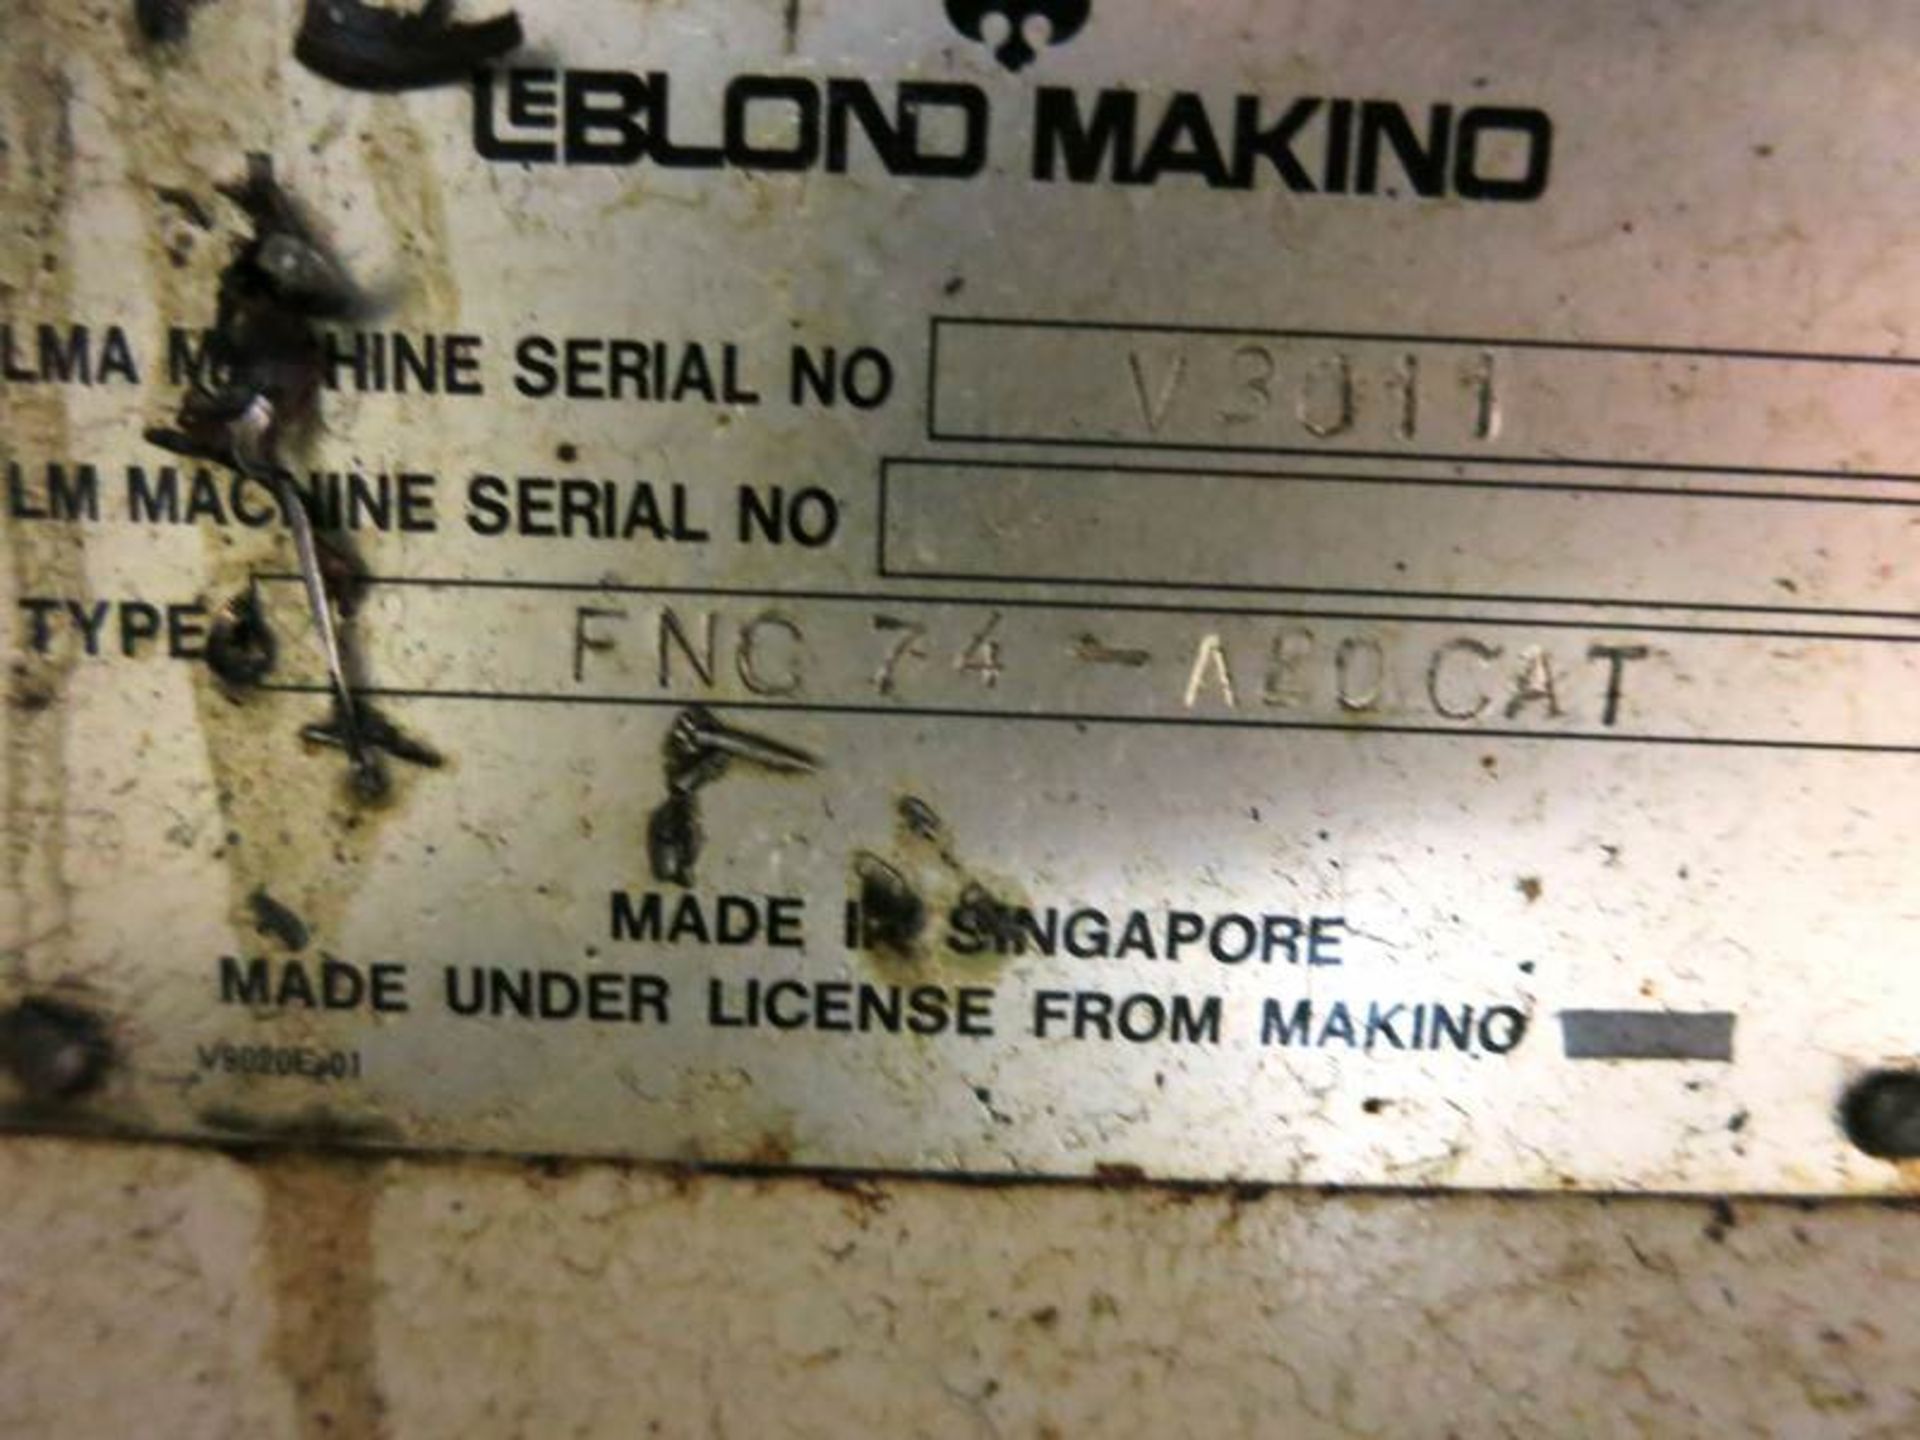 LEBLOND MAKINO FNC-74-A20CAT 4-AXIS CNC VERTICAL MACHINING CENTER, S/N V3011, NEW 1990 General - Image 6 of 7